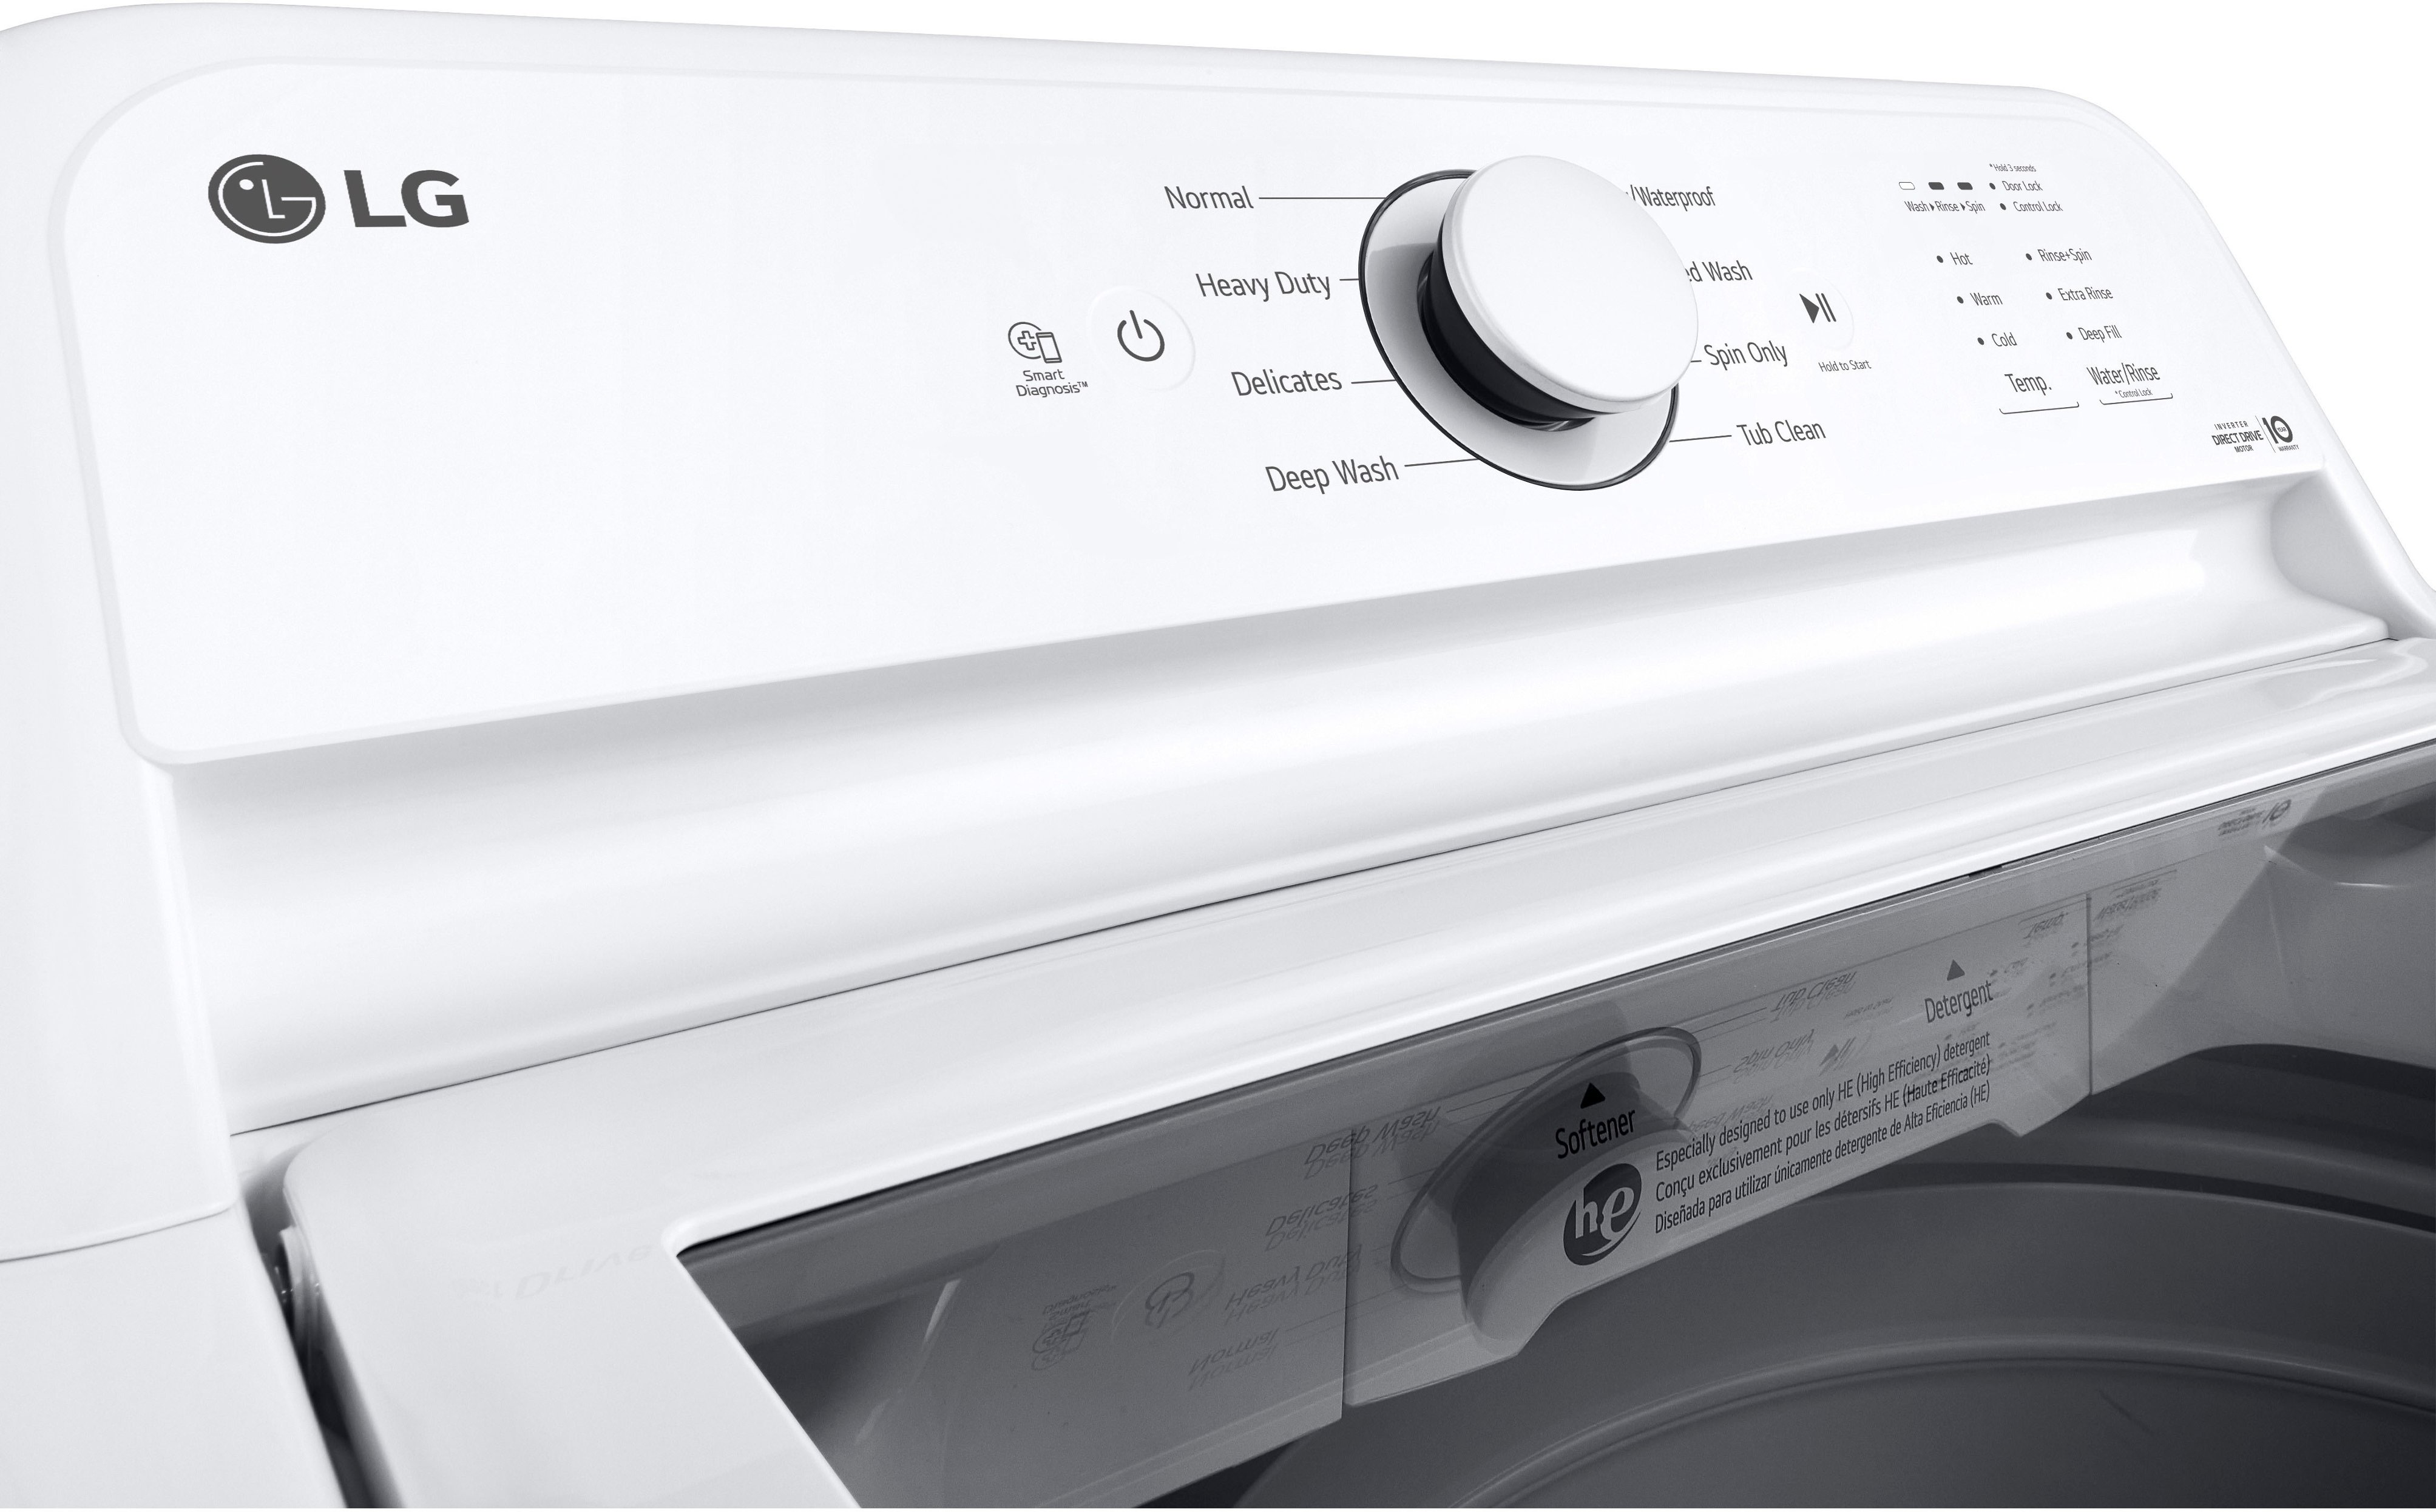 SlamProof White Lid Ft. Top LG WT6105CW Washer 4.1 Cu. Best Glass Load - with Buy